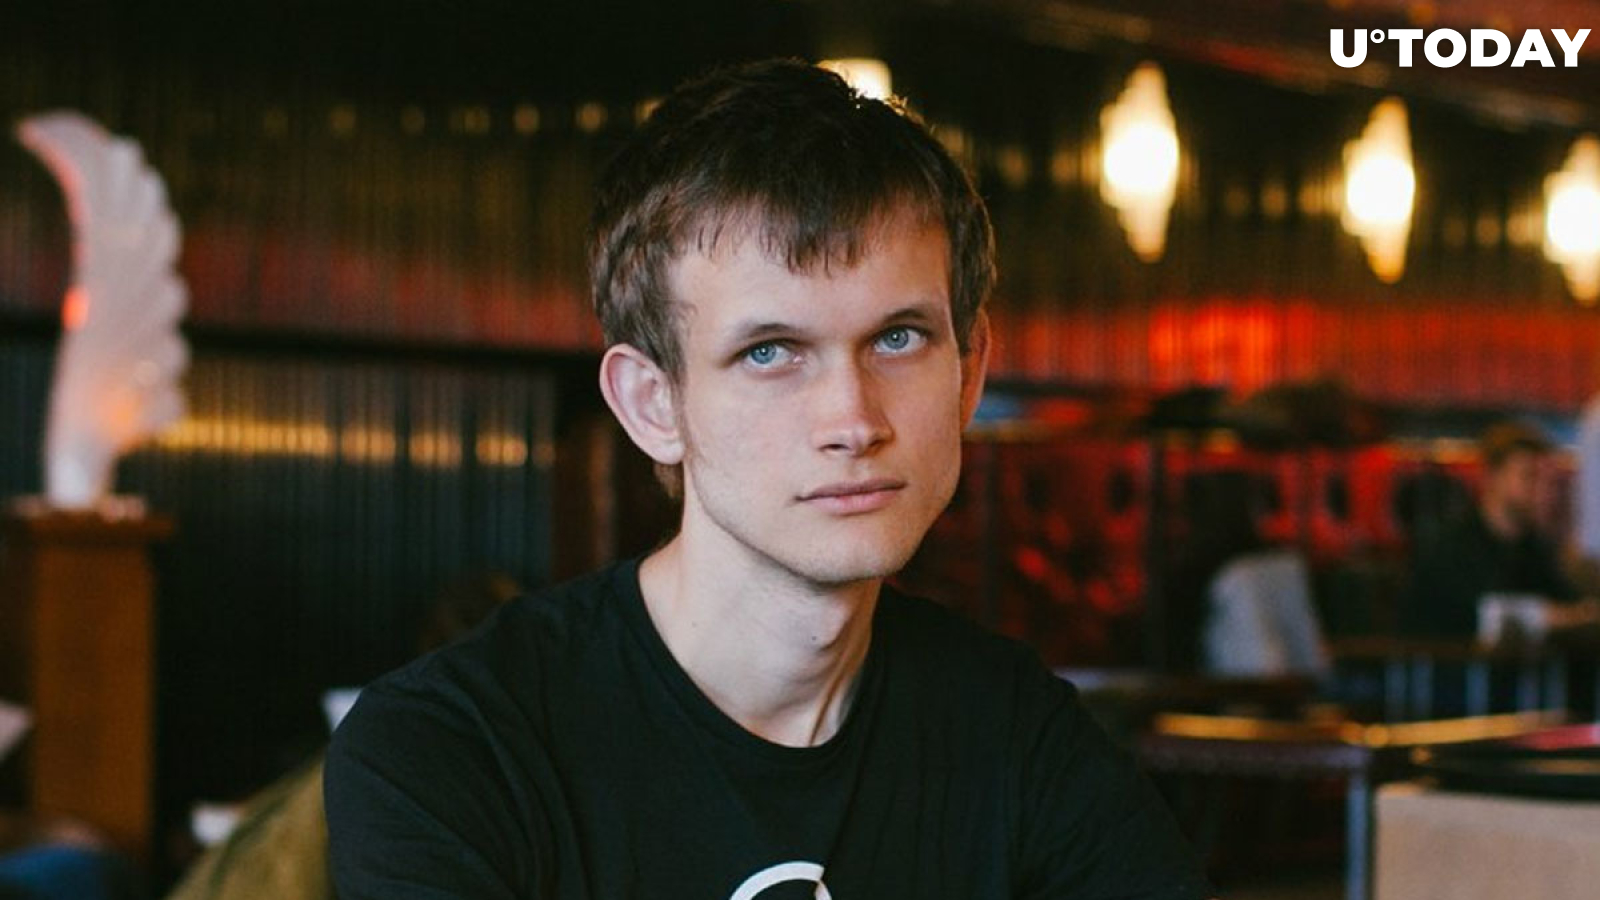 Ethereum Founder Vitalik Buterin Says Stock Market Became 'More Like Cryptocurrency'